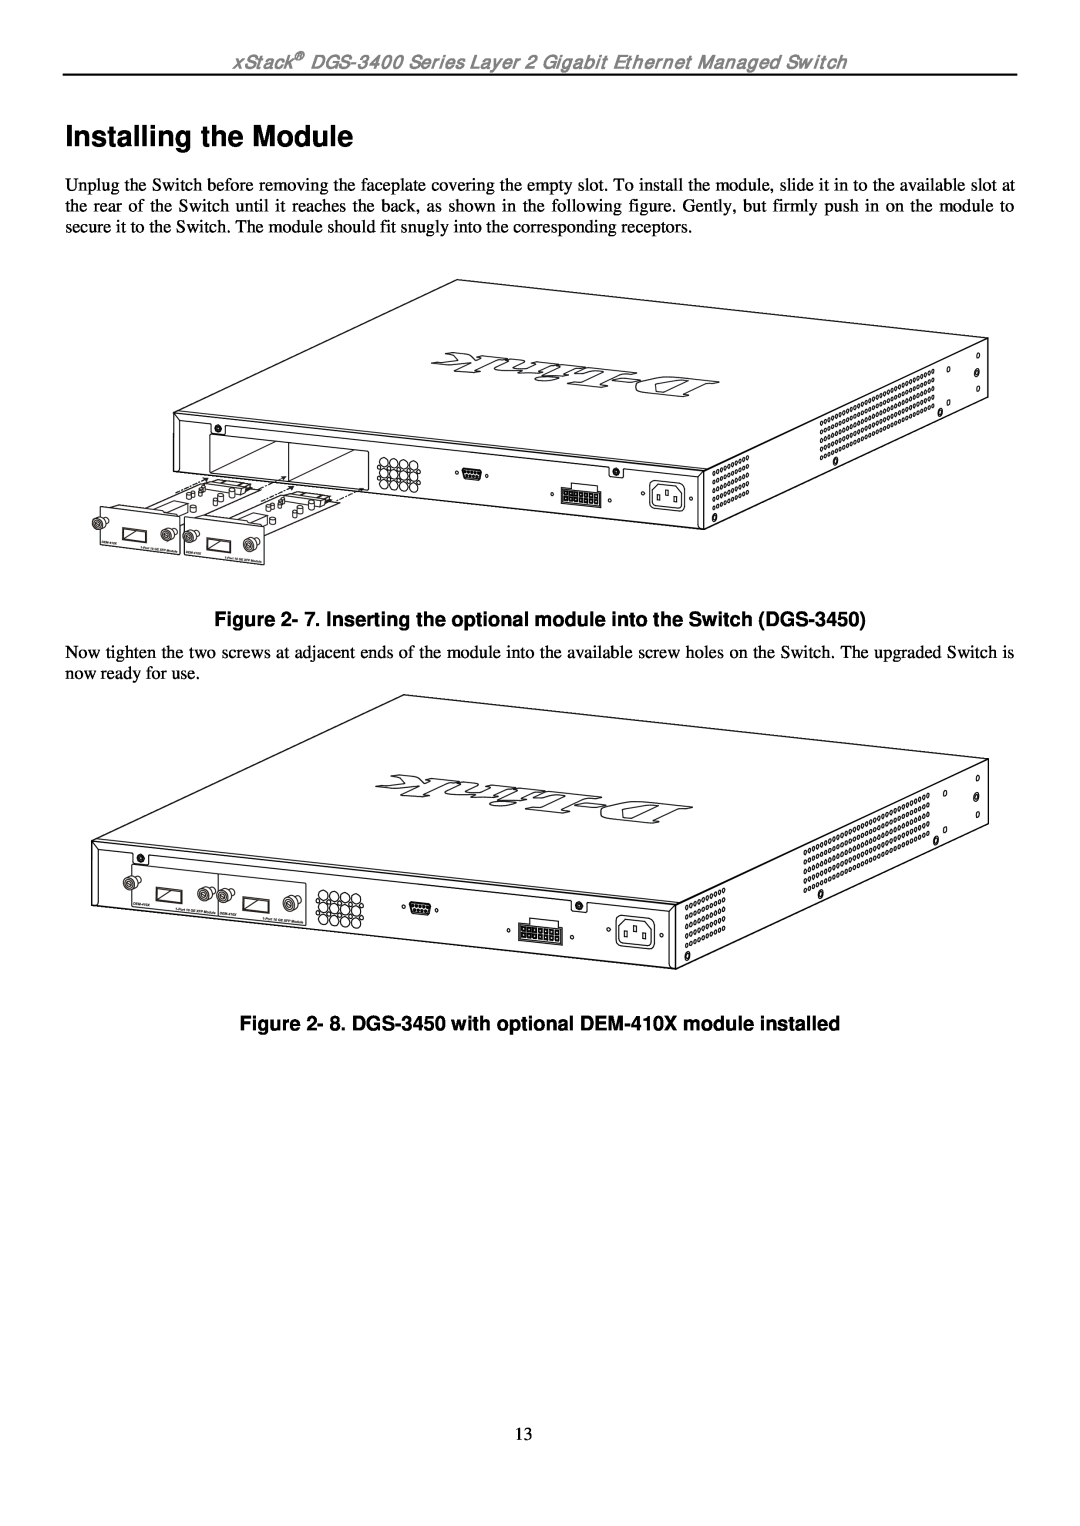 D-Link ethernet managed switch manual Installing the Module, 7. Inserting the optional module into the Switch DGS-3450 